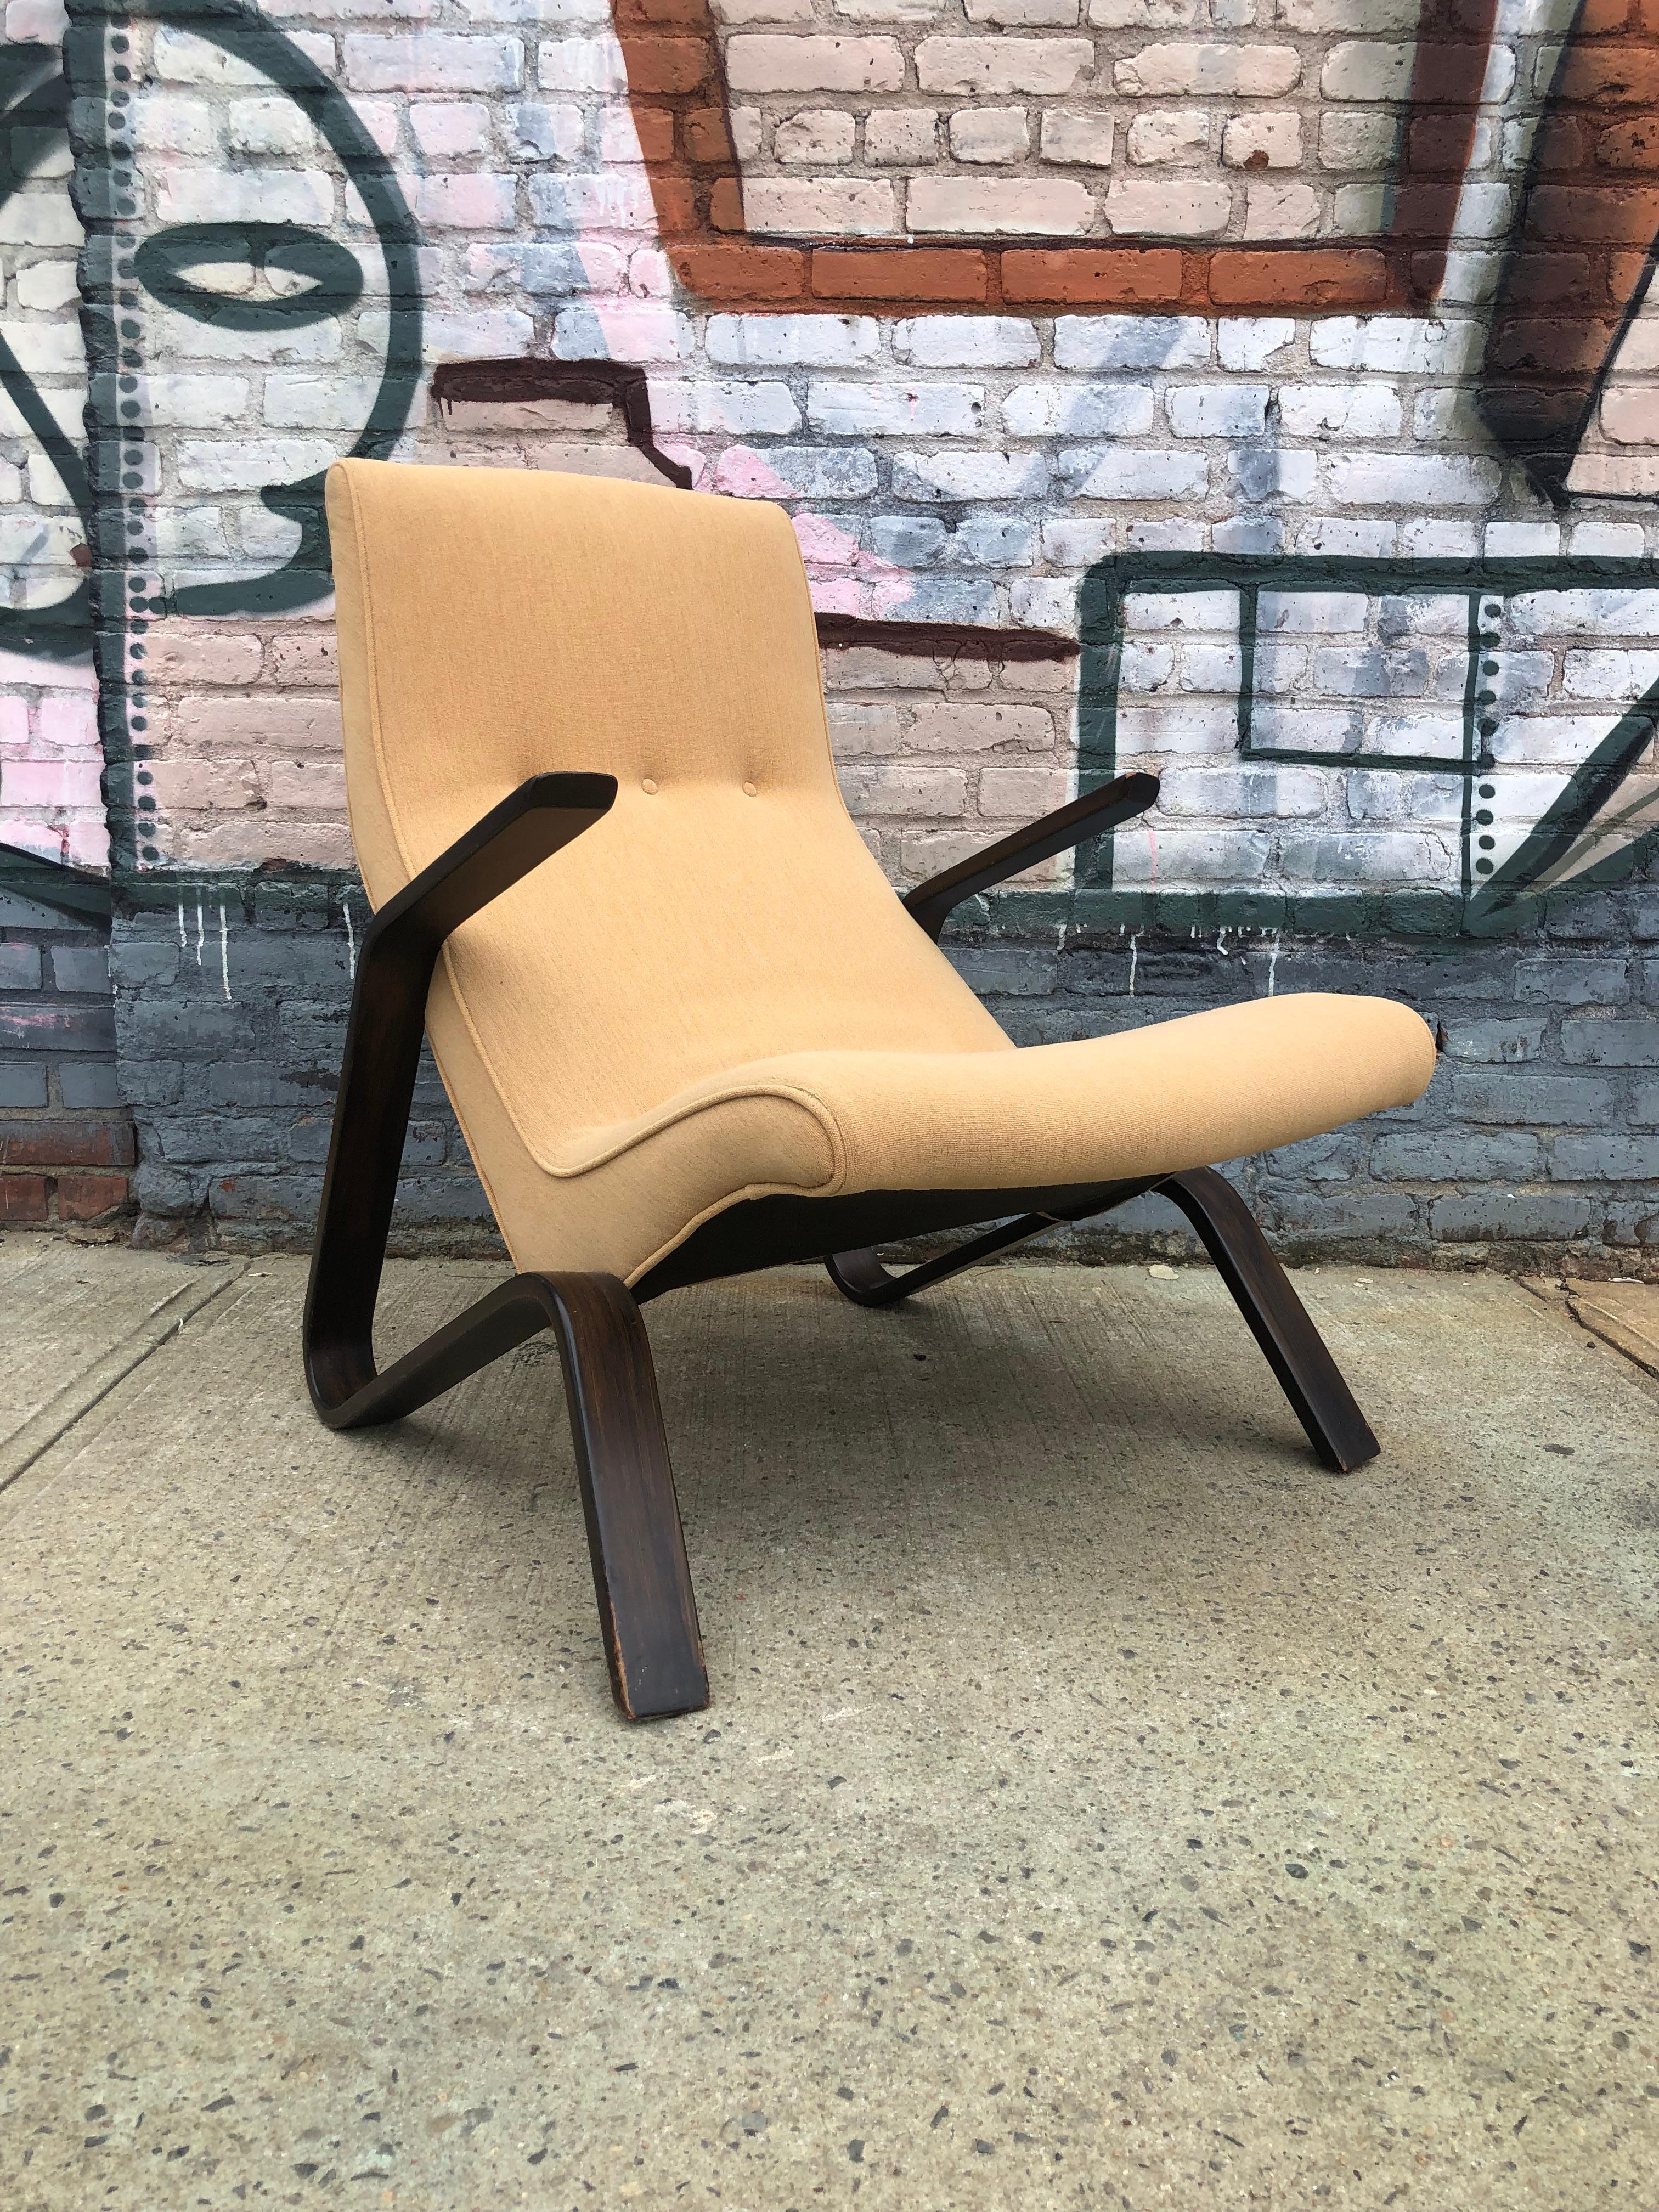 Extremely comfortable and elegant Eero Saarinen grasshopper chair and ottoman. In good condition with original chair and ottoman set. No tears or burns to upholstery. Original wood finish.